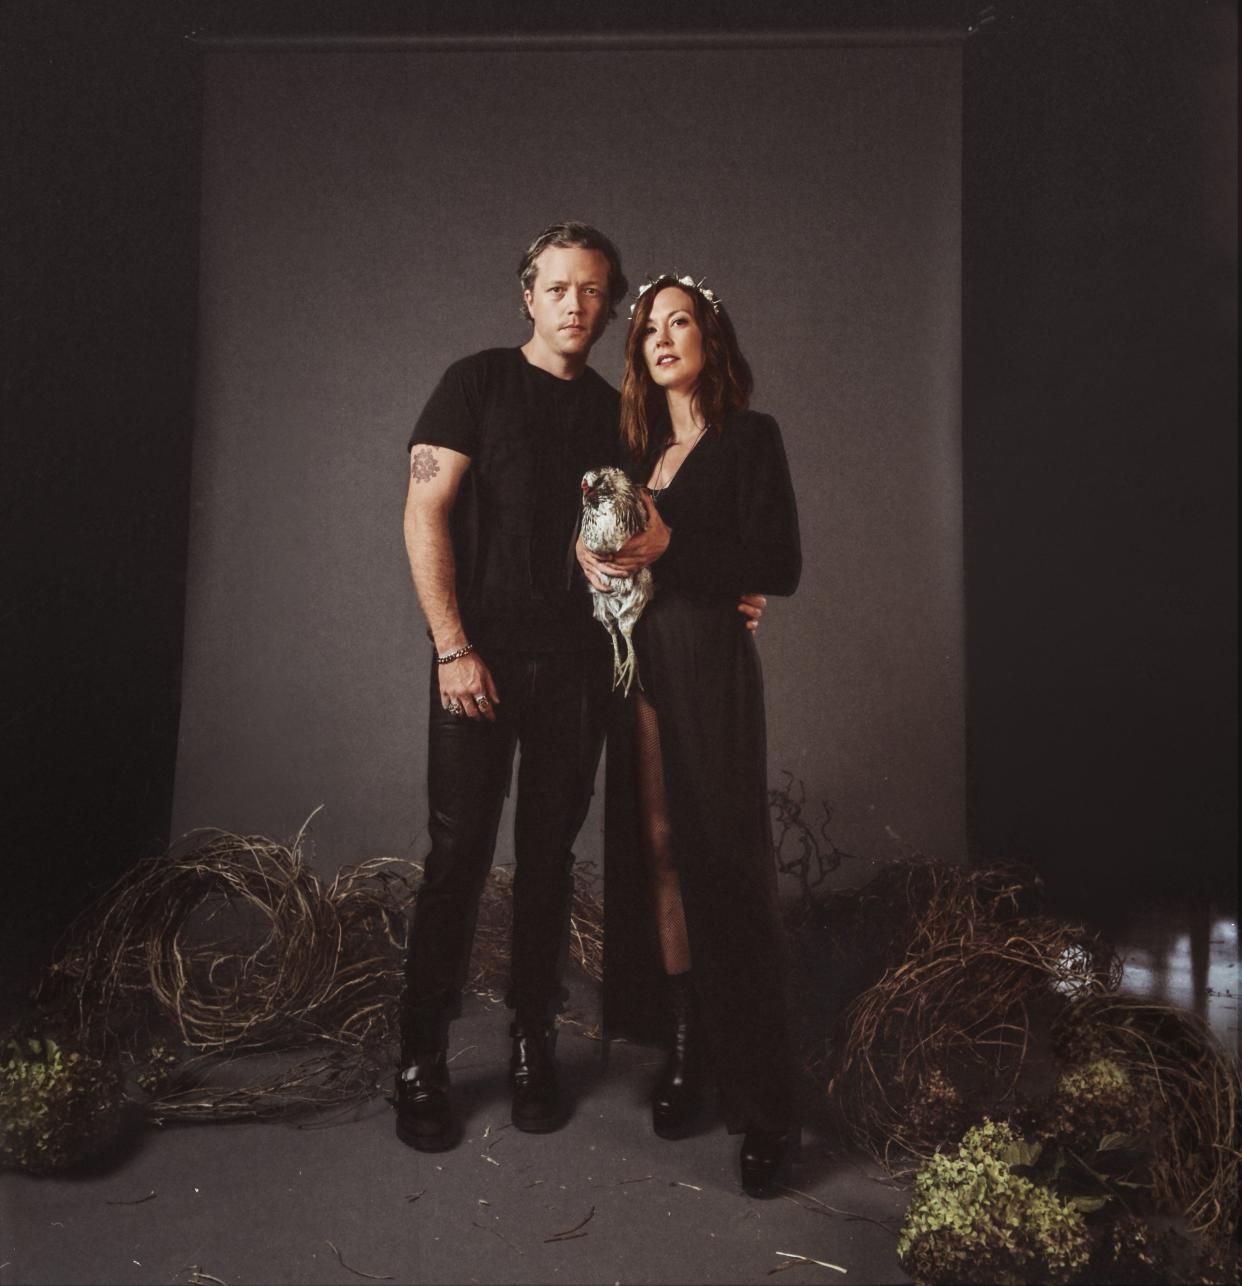 Record Store Day co-ambassadors Jason Isbell and Amanda Shires, husband and wife musicians. Each will be performing at a record store on Saturday, the day of the retail event.